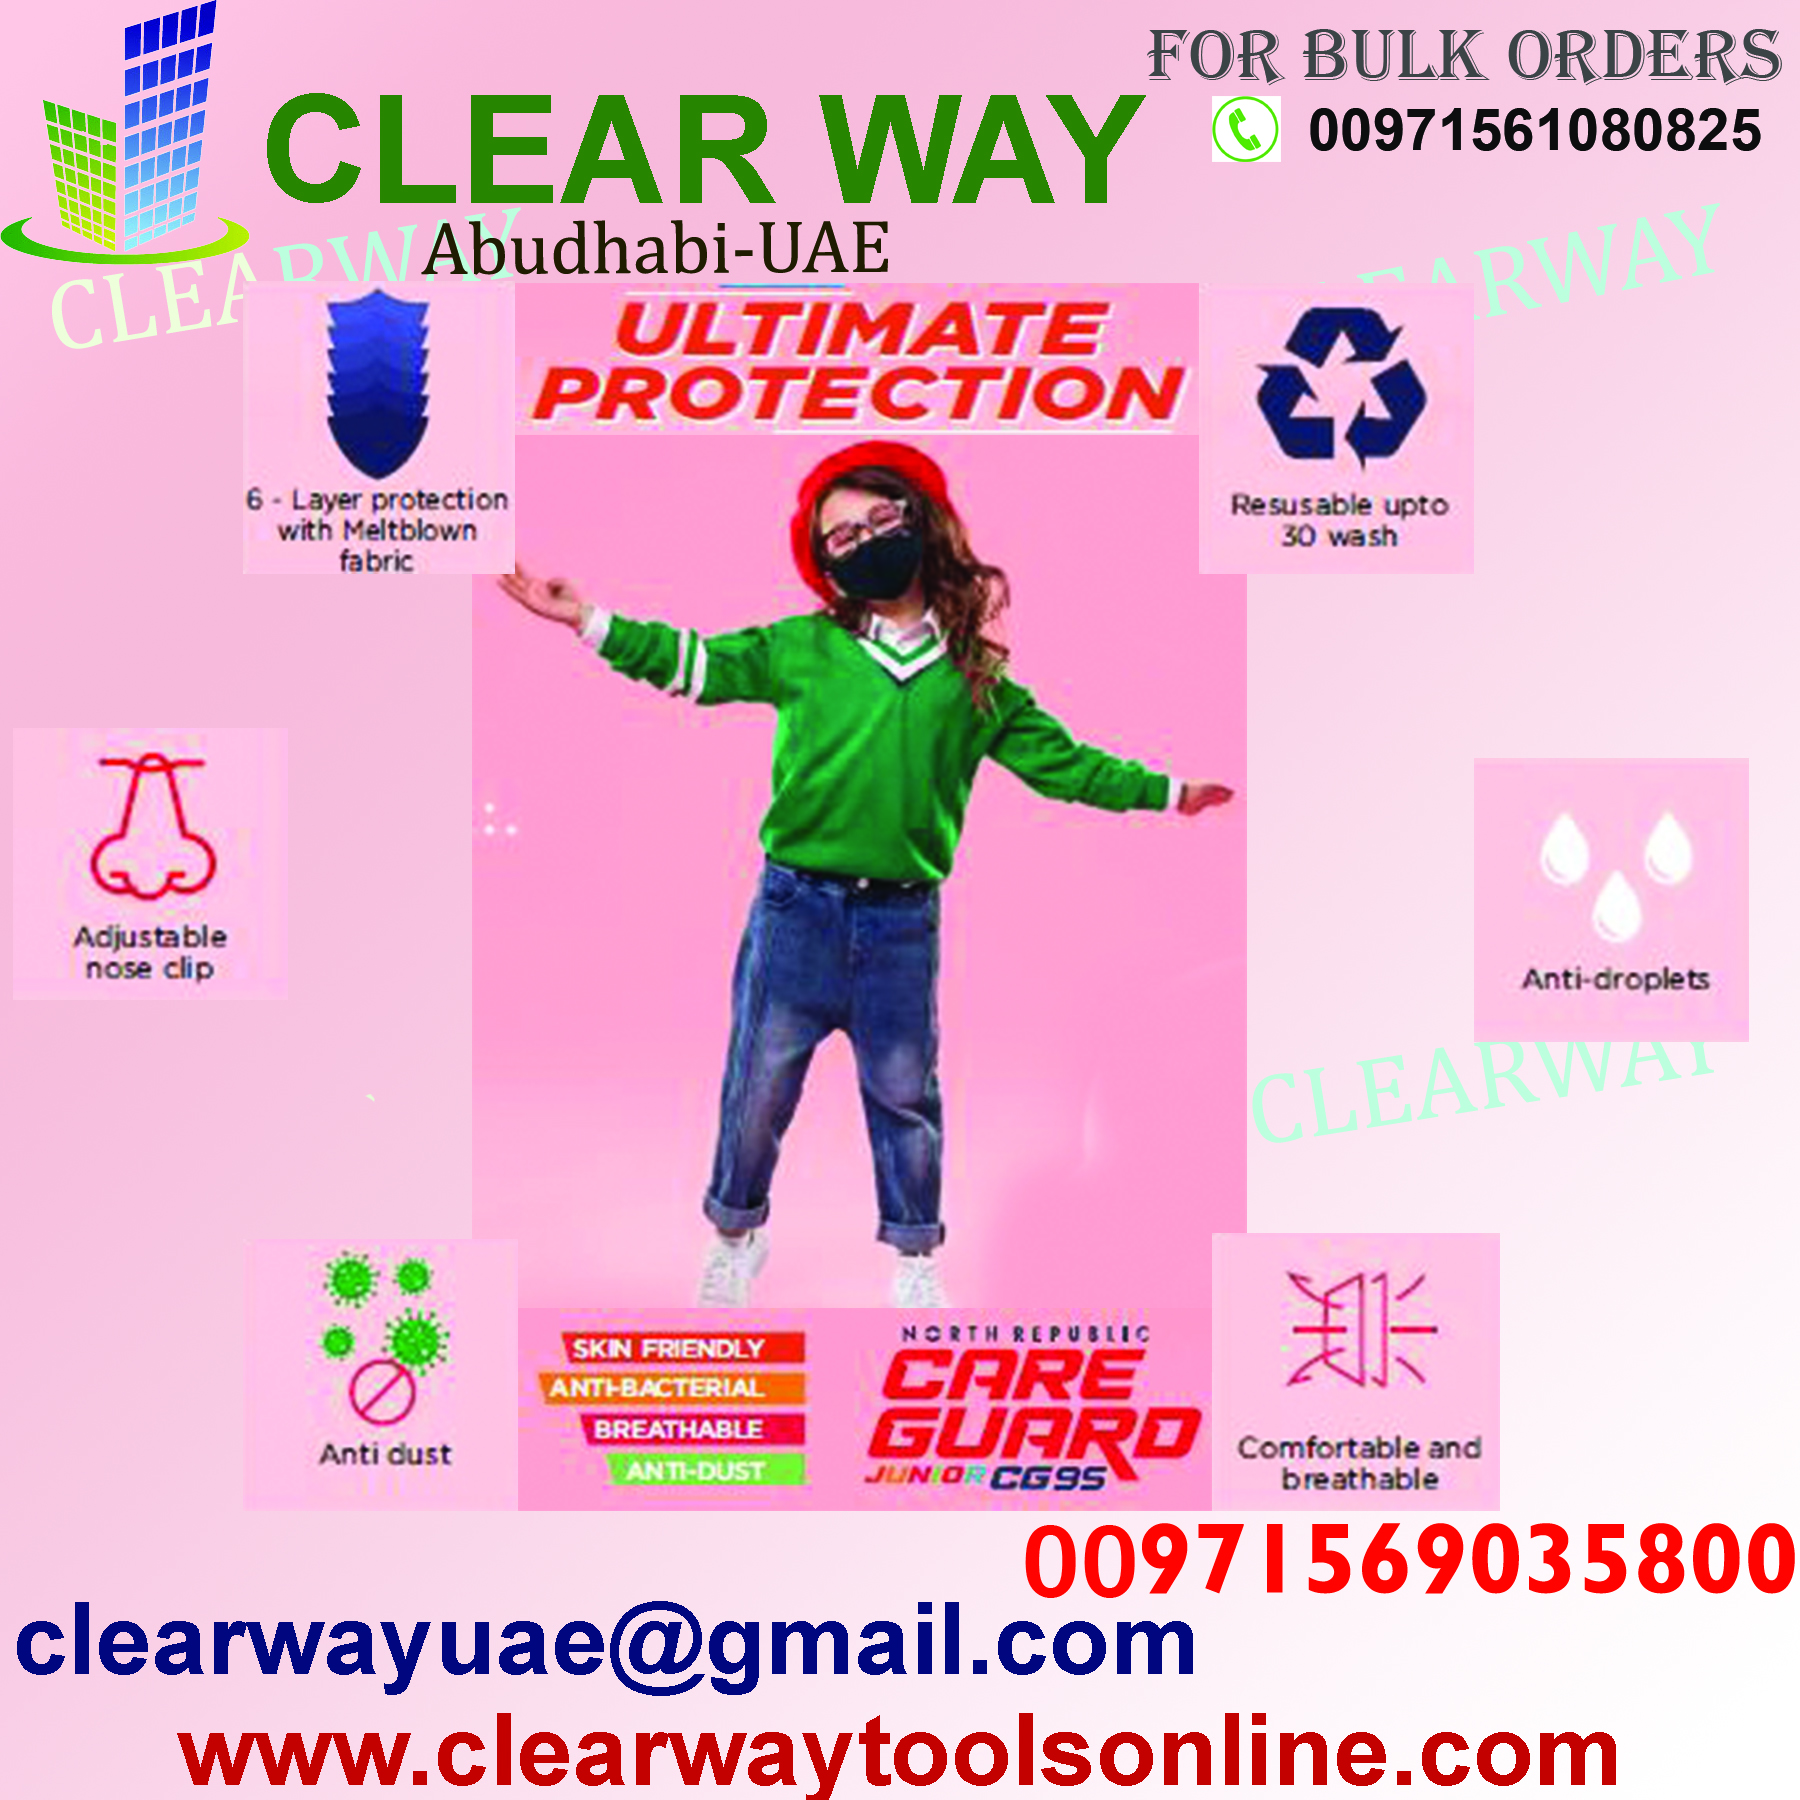 NORTH REPUBLIC DEALER IN MUSSAFAH , ABUDHABI , UAE BY CLEARWAY